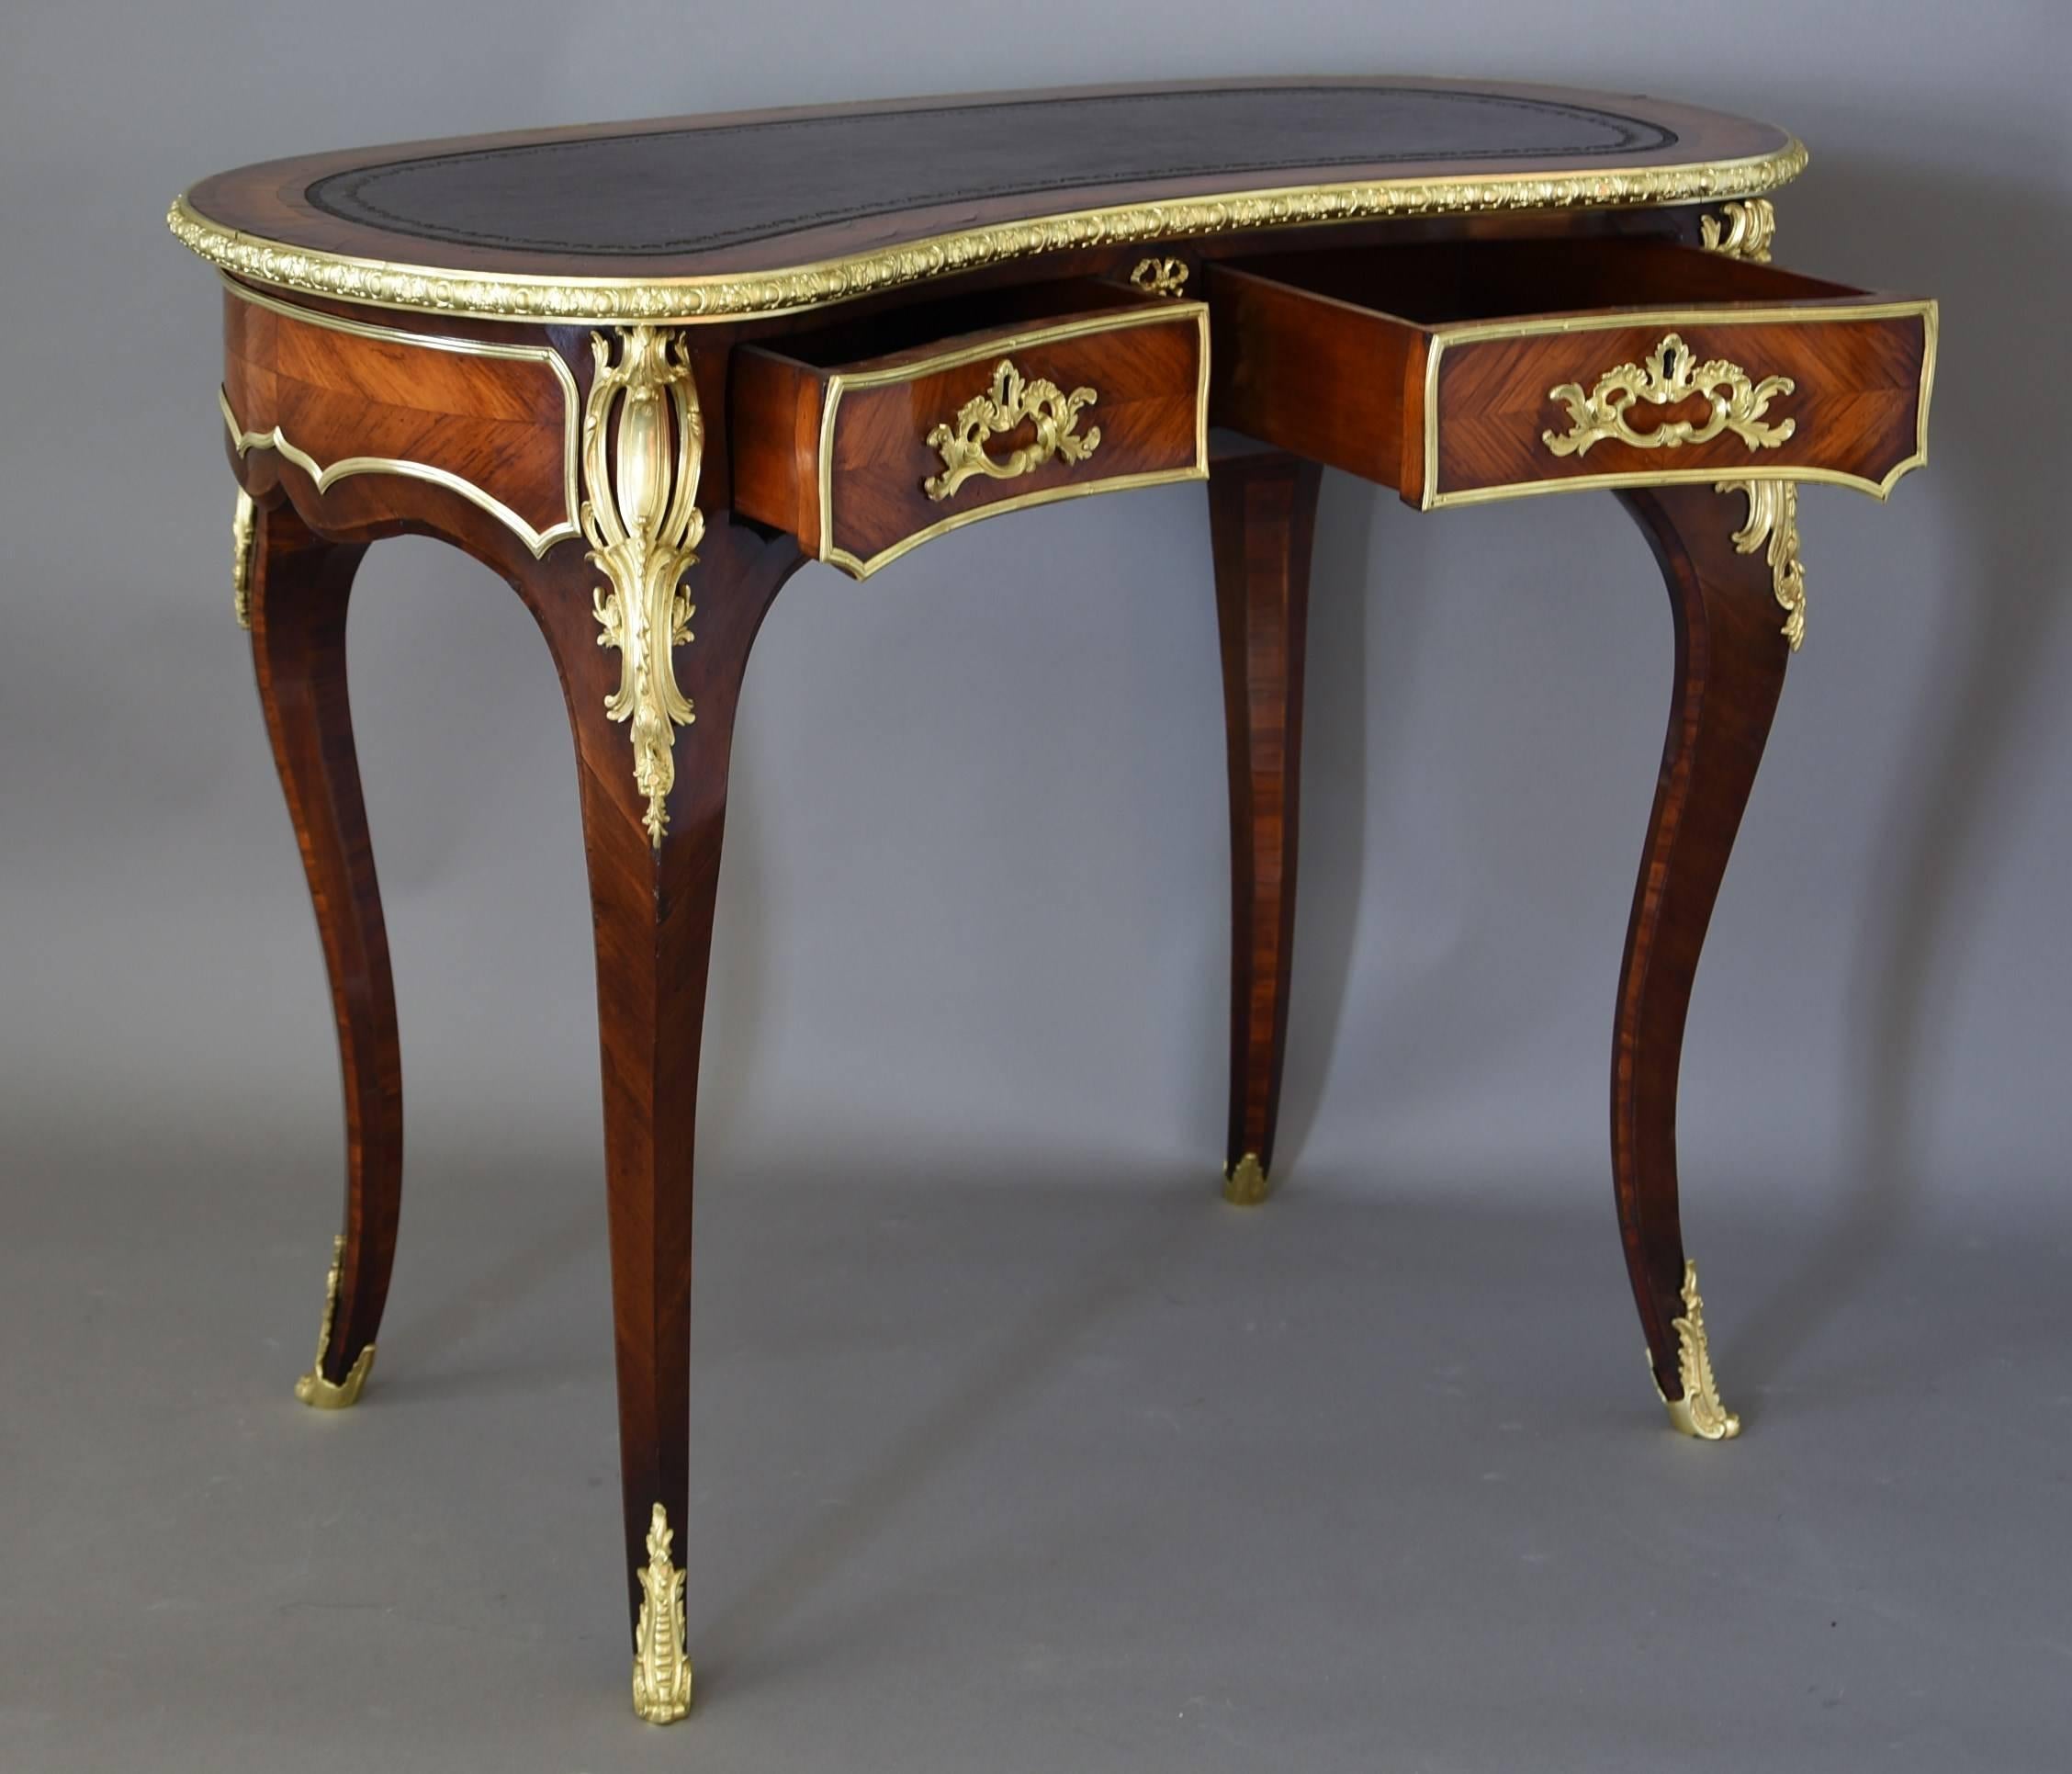 Leather 19th Century Kingwood Freestanding Kidney Shaped Ladies Writing Table For Sale